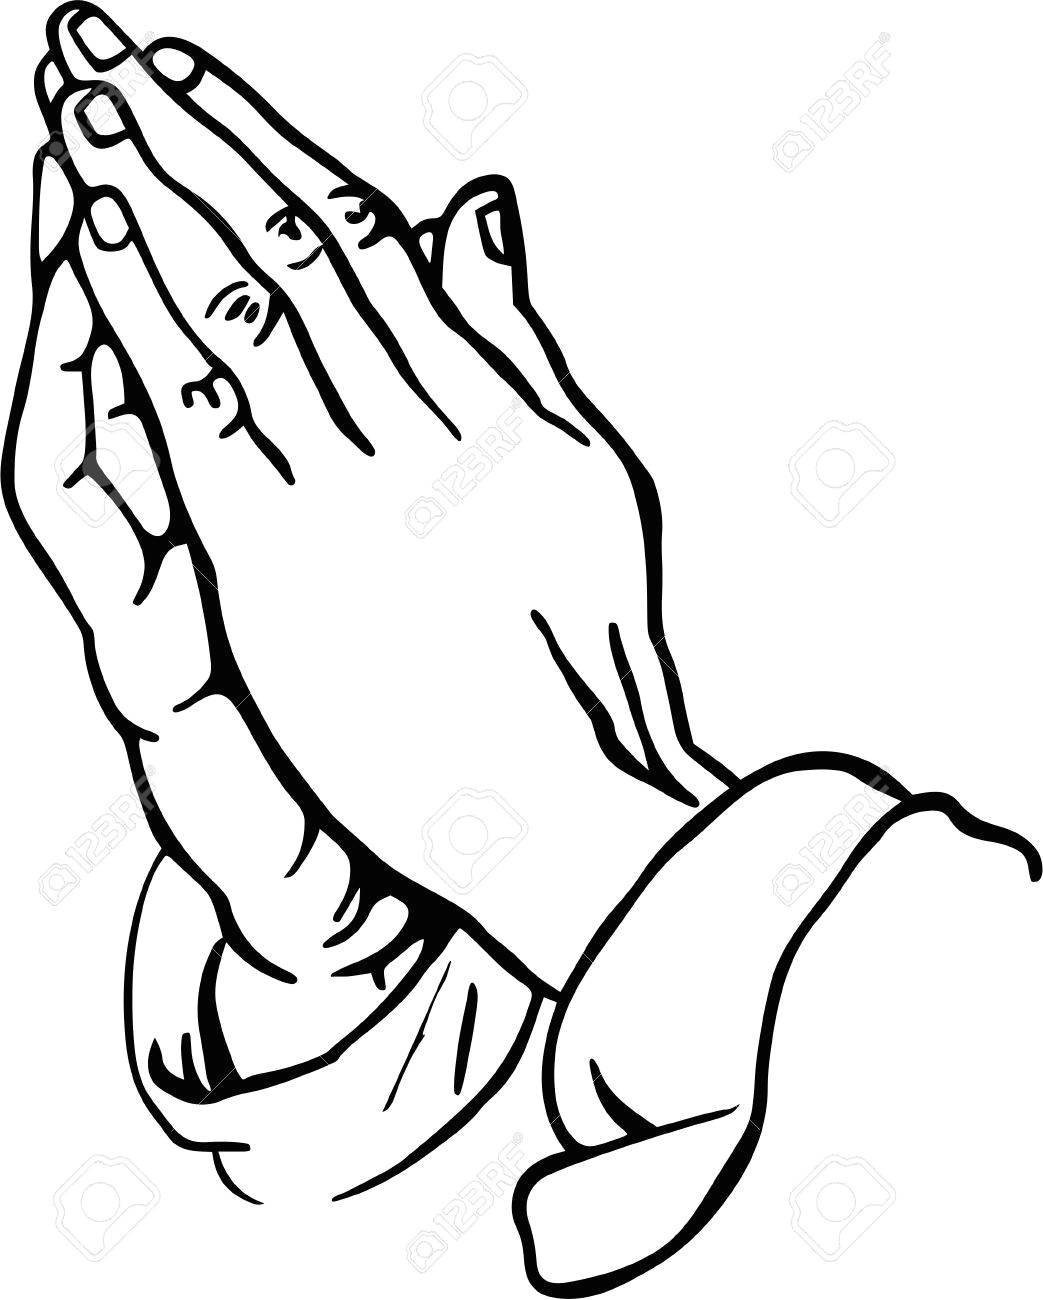 praying hands clipart stock photo picture and royalty free image more